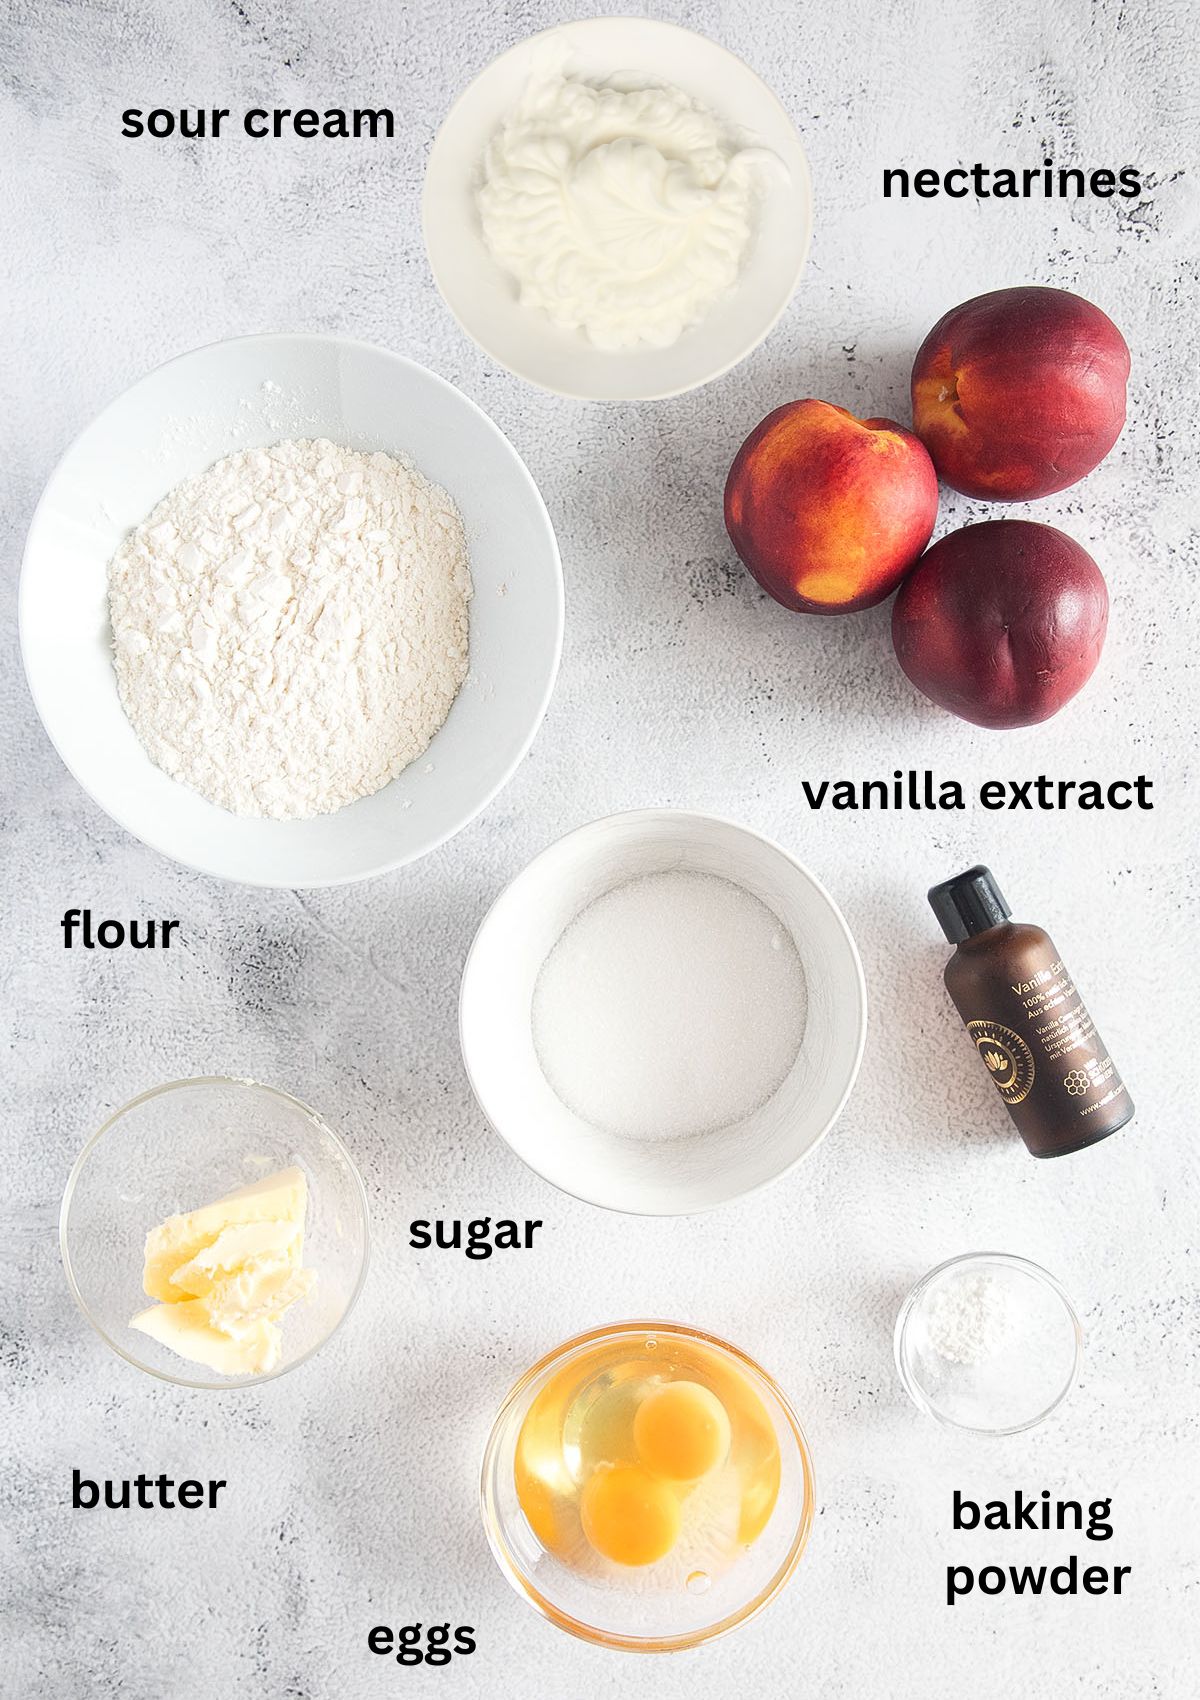 listed ingredients for making muffins with nectarines and streusel crumb topping.